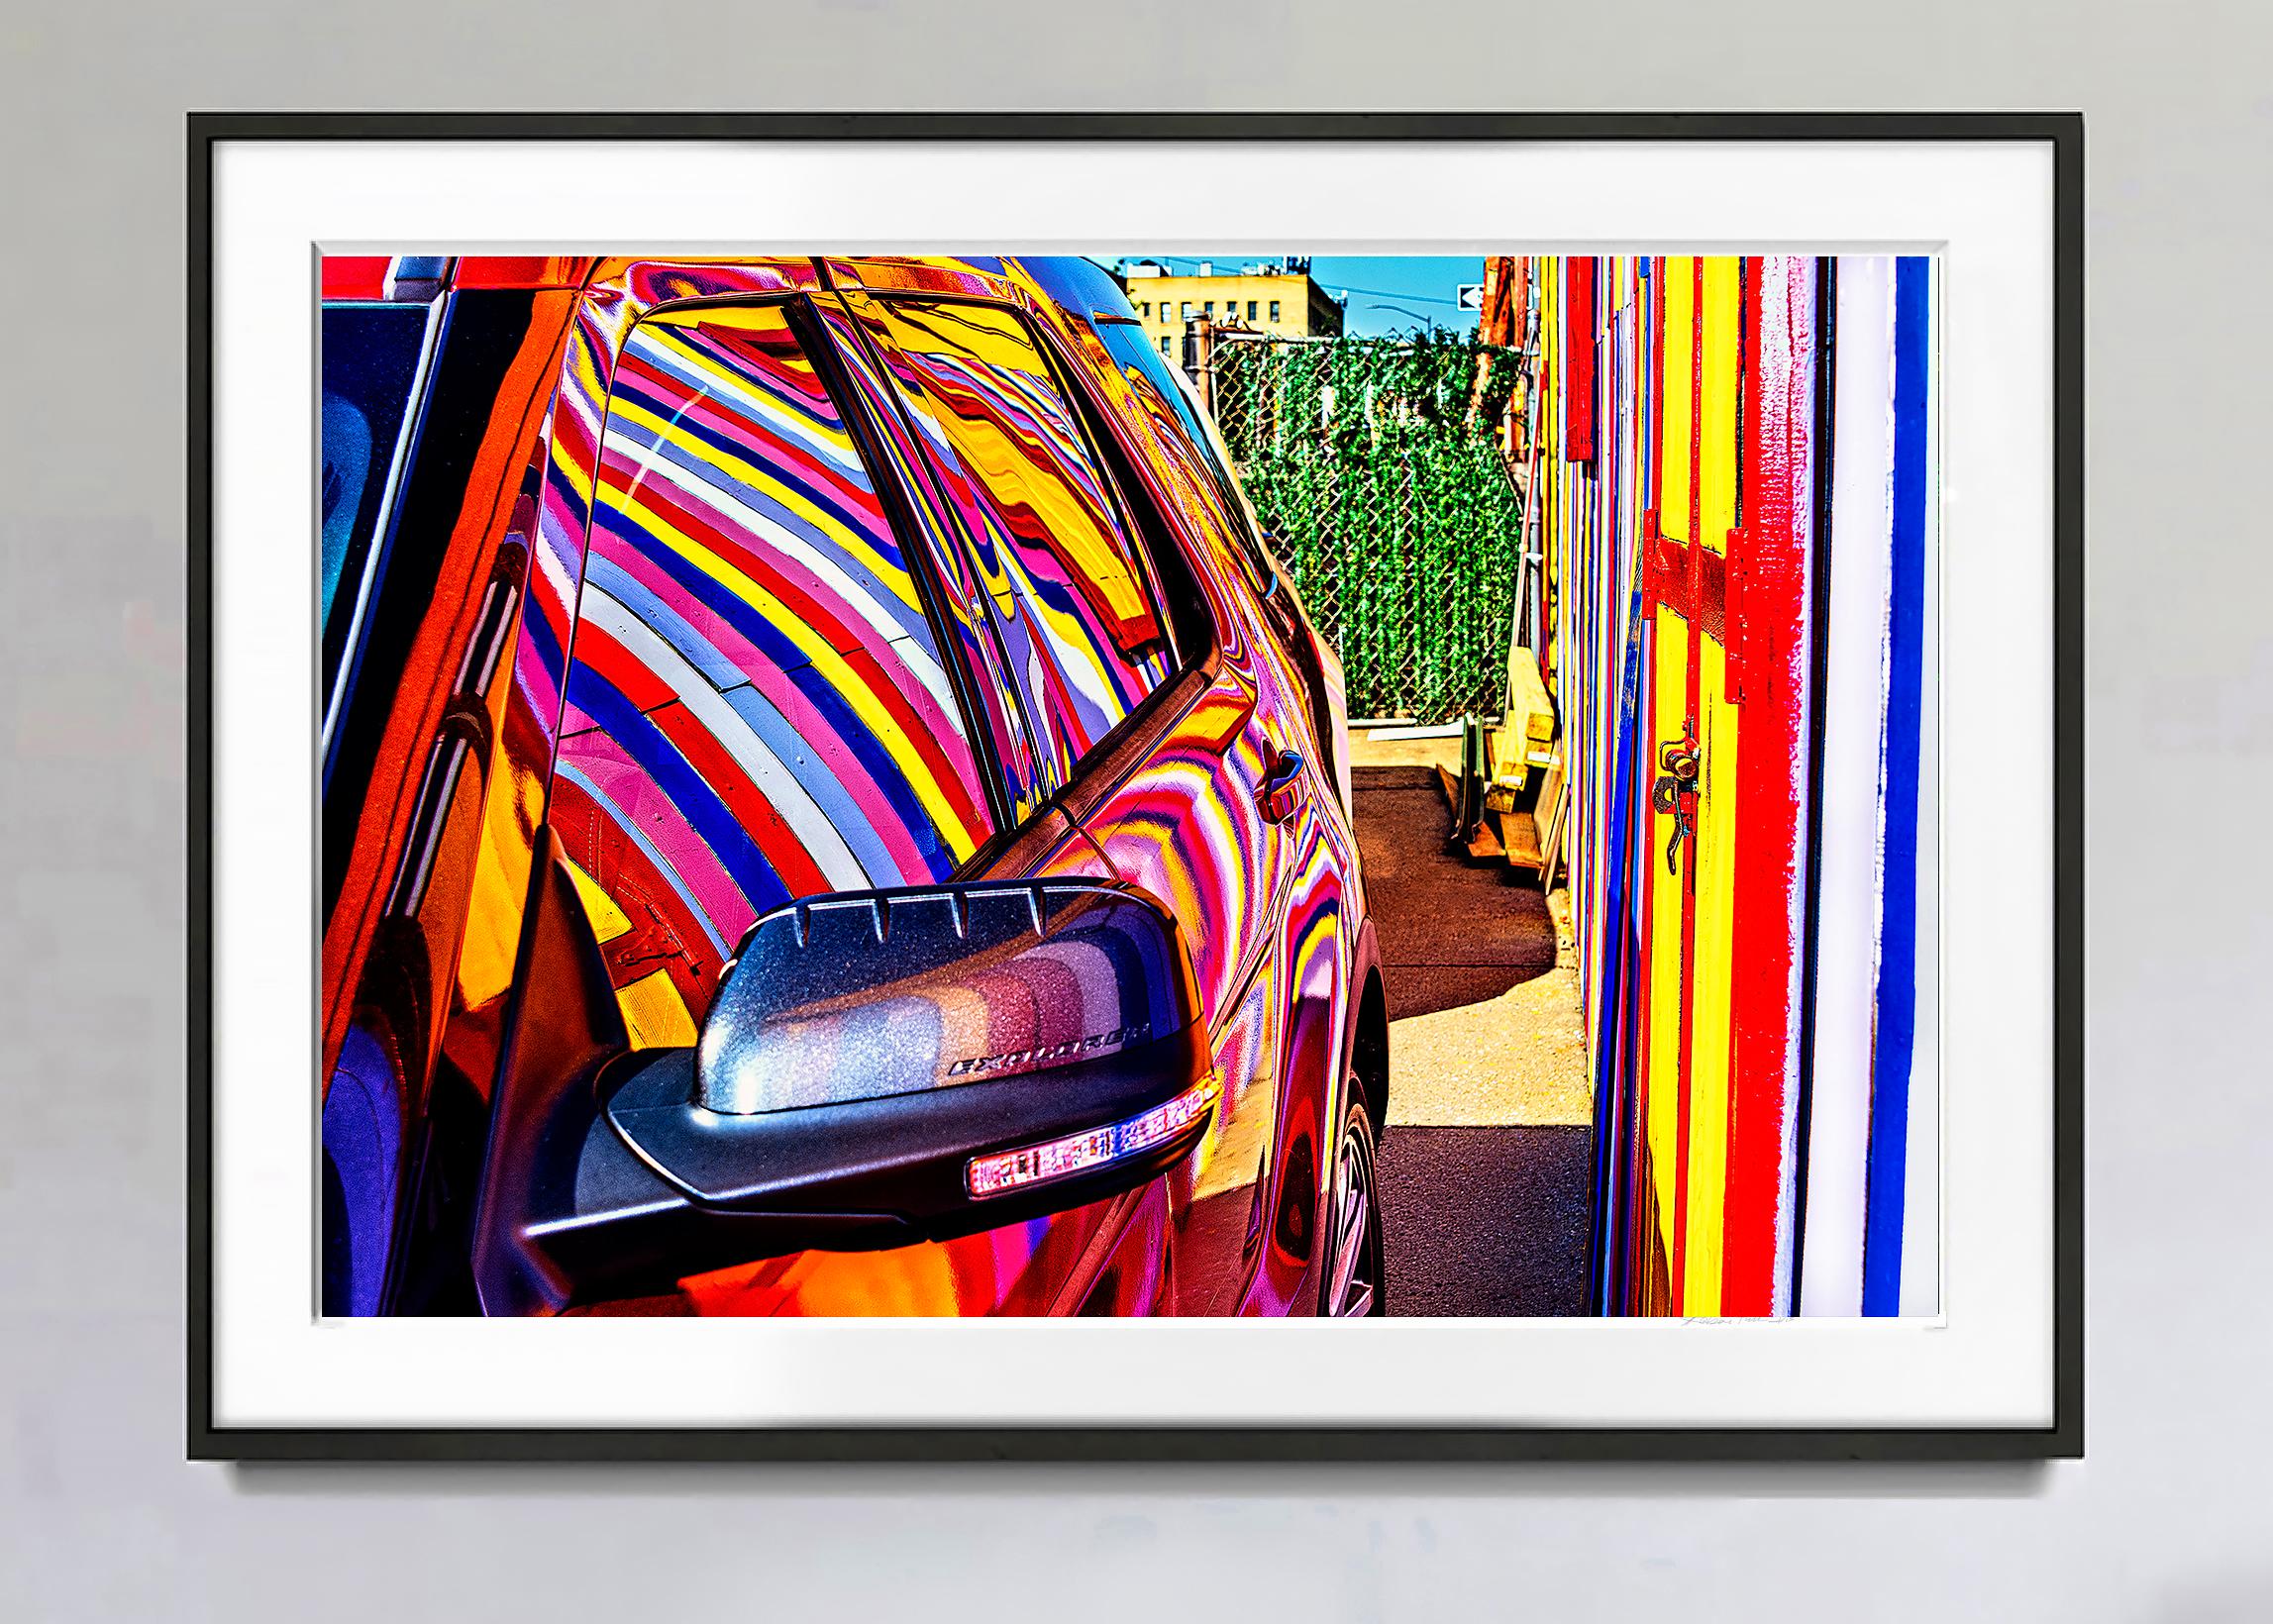 Colorful Street Art Reflected in Car - Photograph by Mitchell Funk